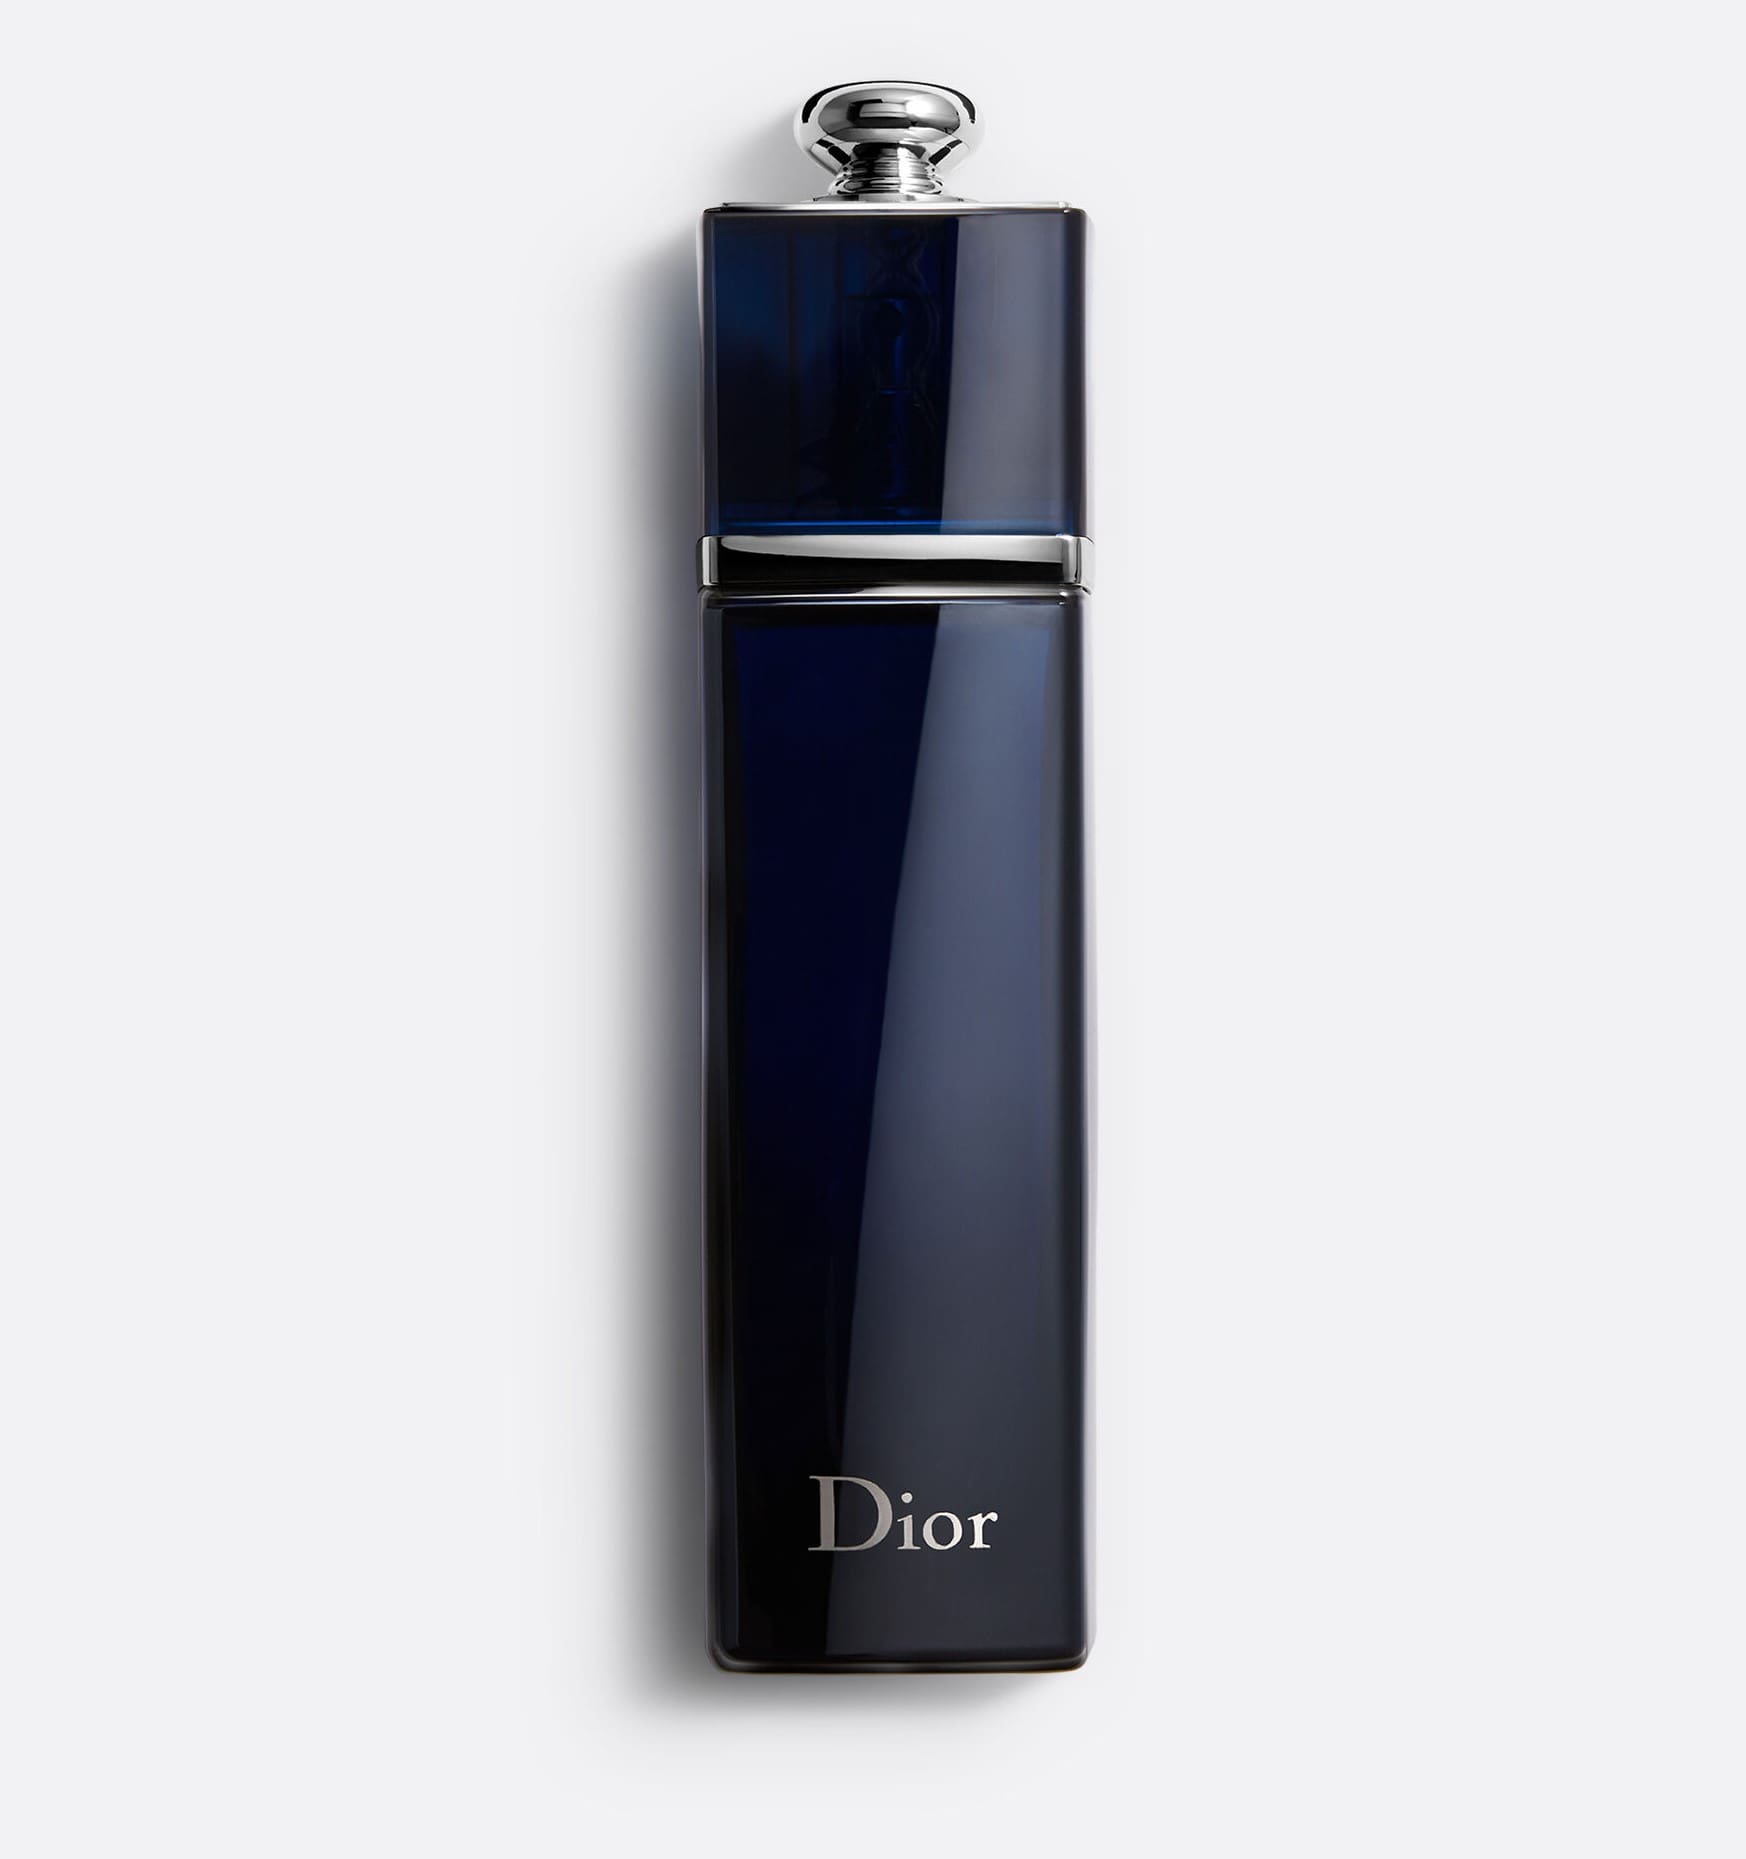 DIOR Addict EDP Perfume for Women by Dior